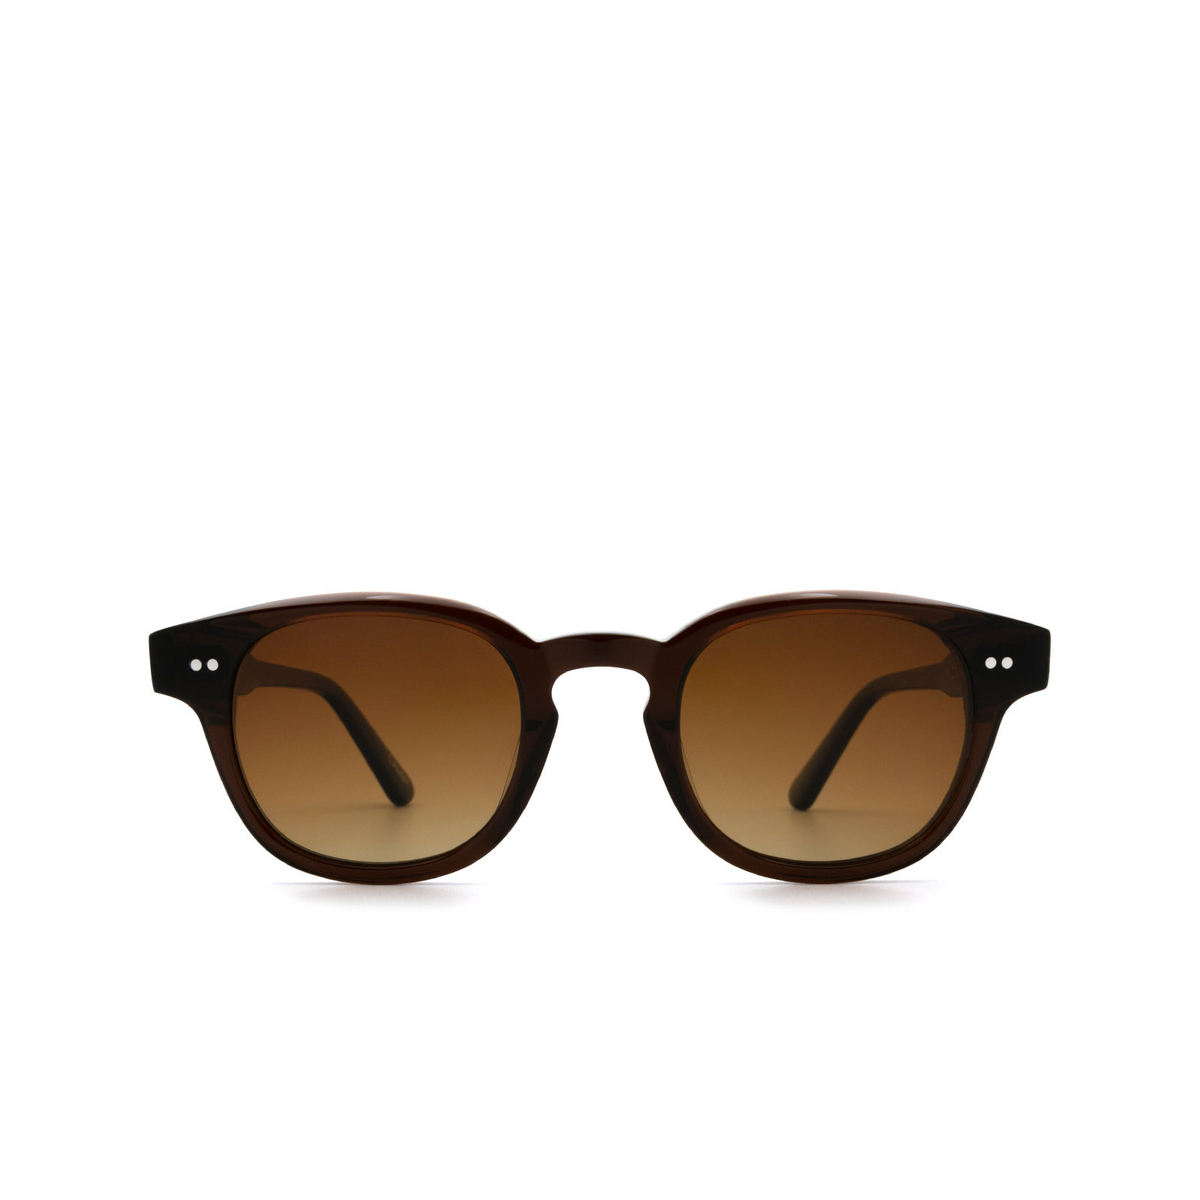 Chimi® Square Sunglasses: 01 color Brown - front view.